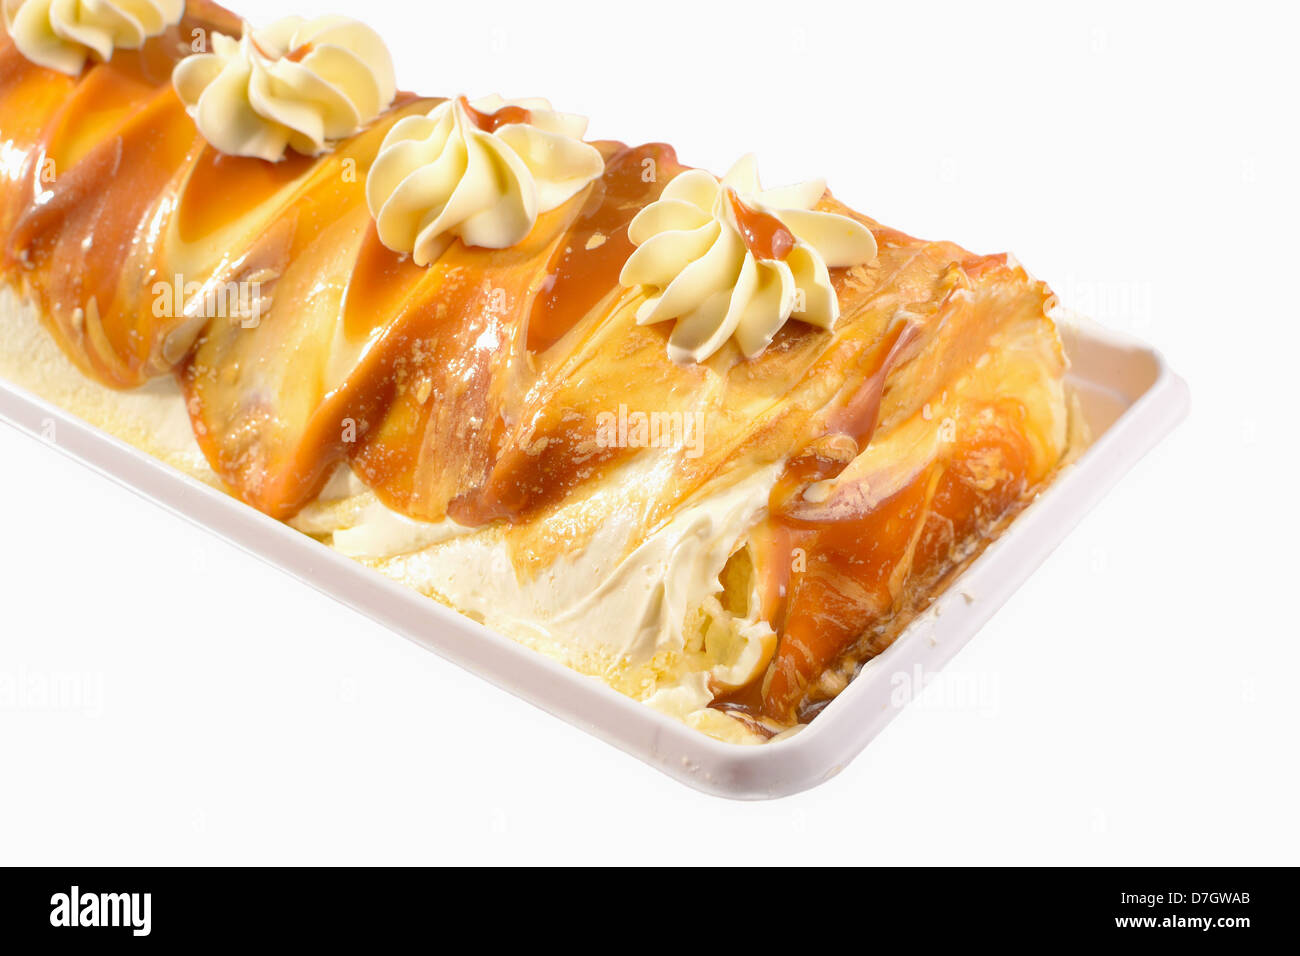 mouth-watering dulce de leche roll with vanilla buttercream icing on top and caramel filling isolated in white background. Stock Photo